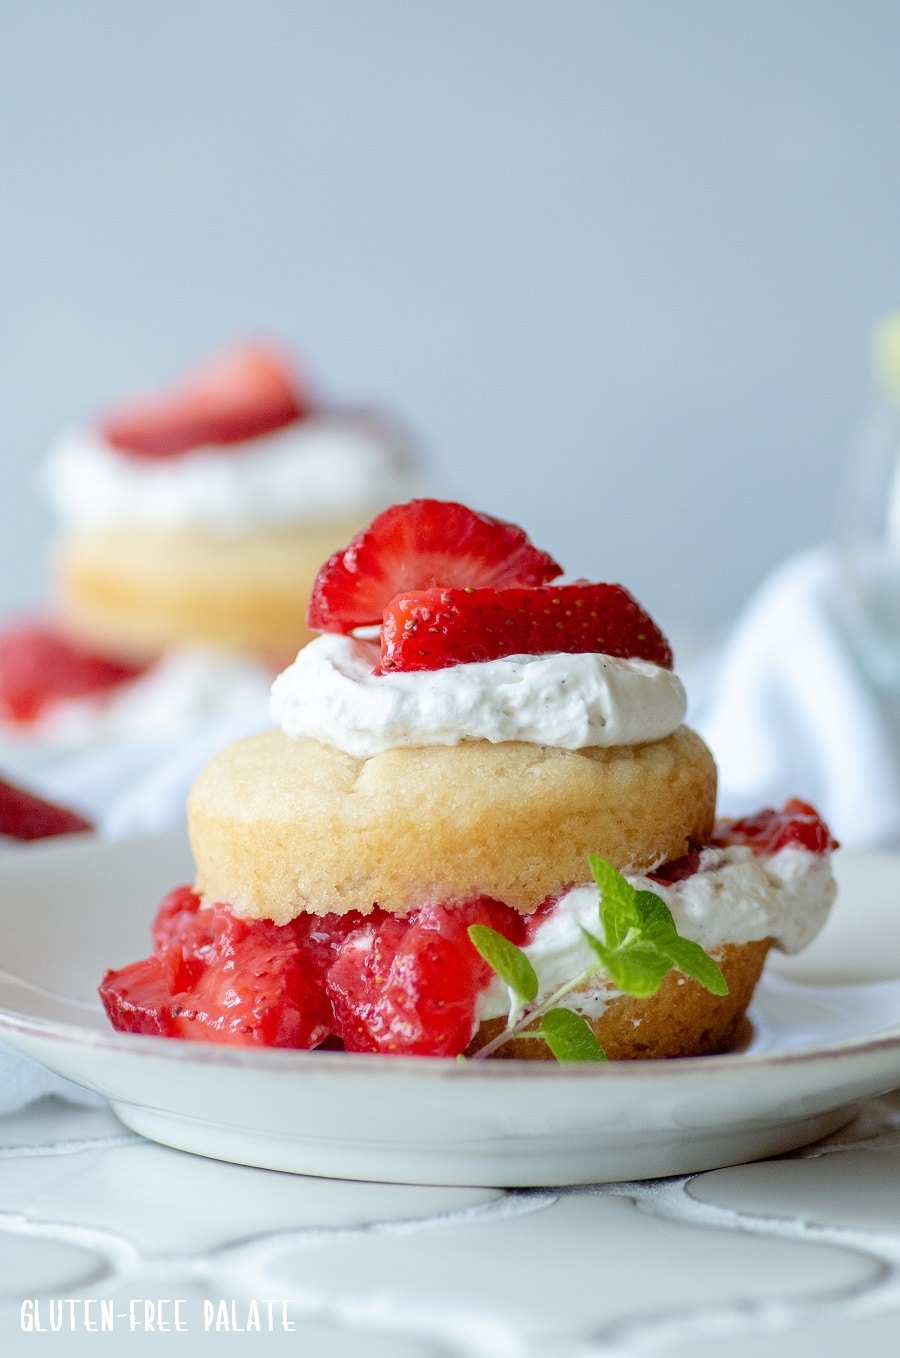 a close up of a Gluten-Free Strawberry Shortcake with whipped cream and sliced strawberries on a white plate with a spring on mint on the side